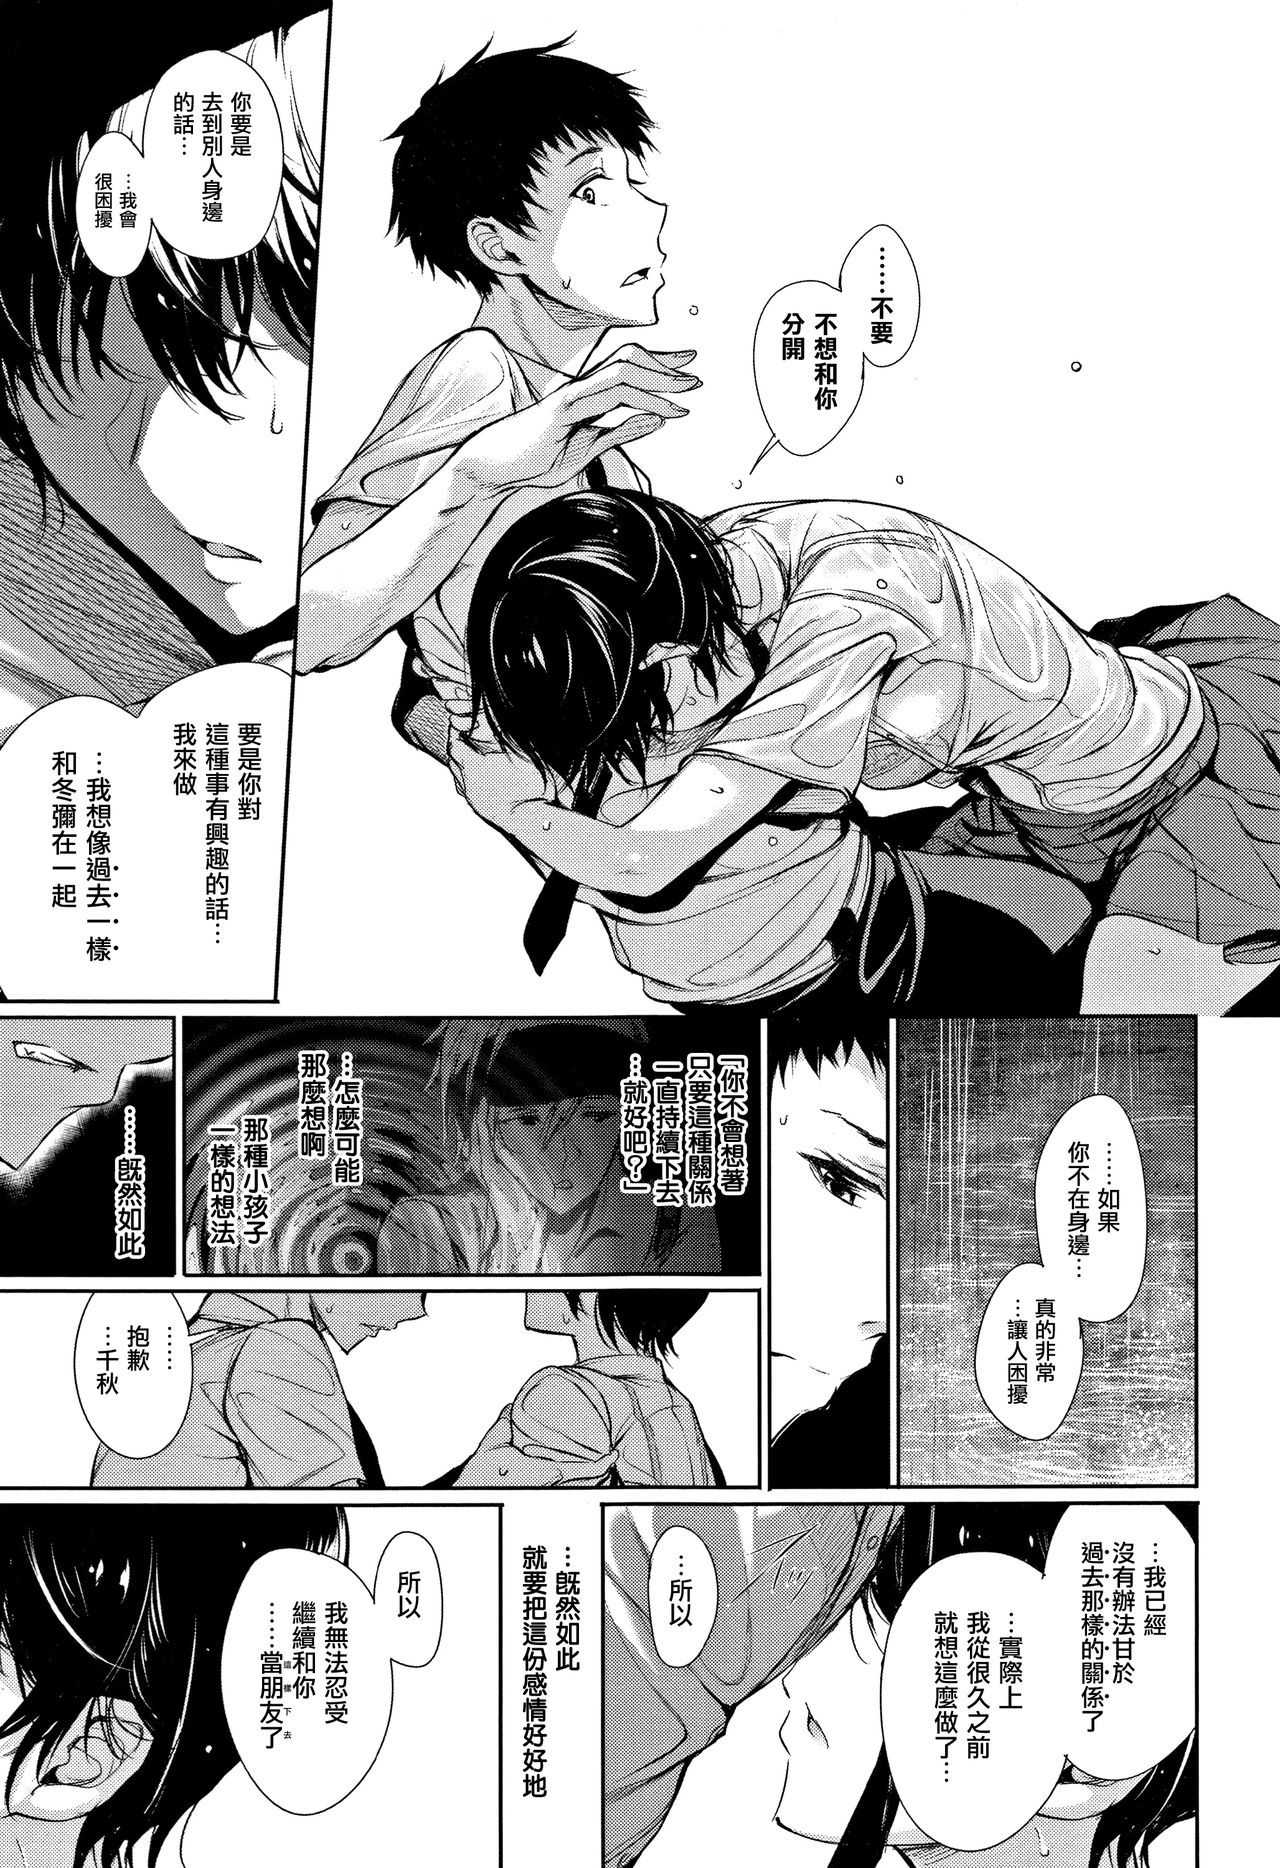 [Gentsuki] Kimi Omou Koi - I think of you. Ch. 1-2 [Chinese] [无毒汉化组] page 38 full